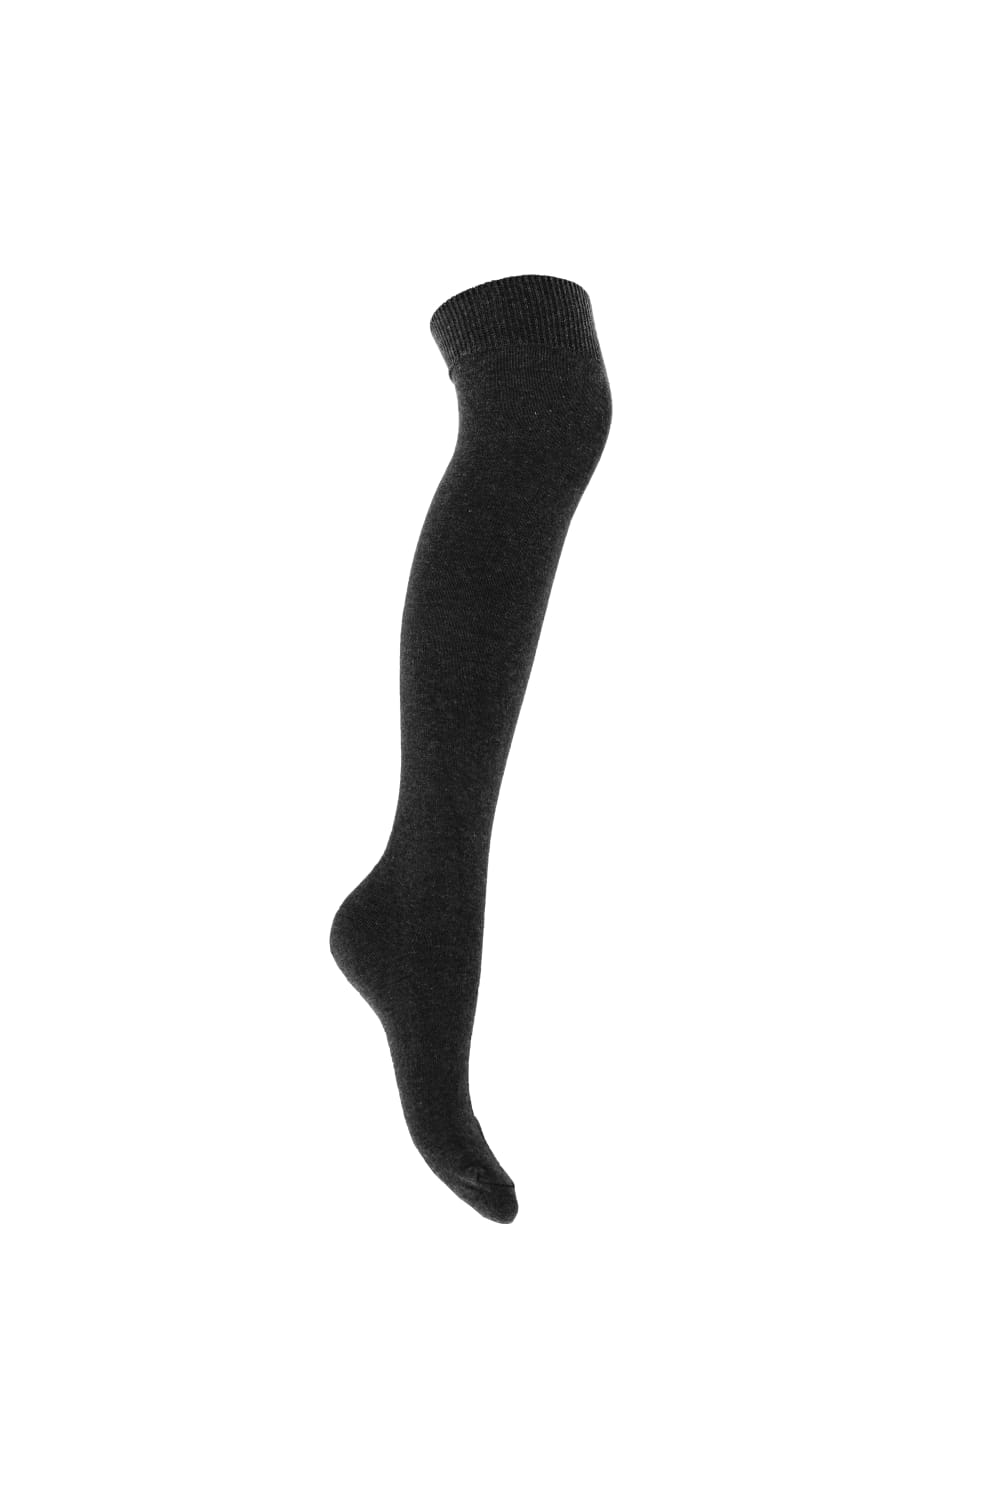 Girls Knee High Plain Casual Socks With LYCRA (Pack Of 3) (Black)